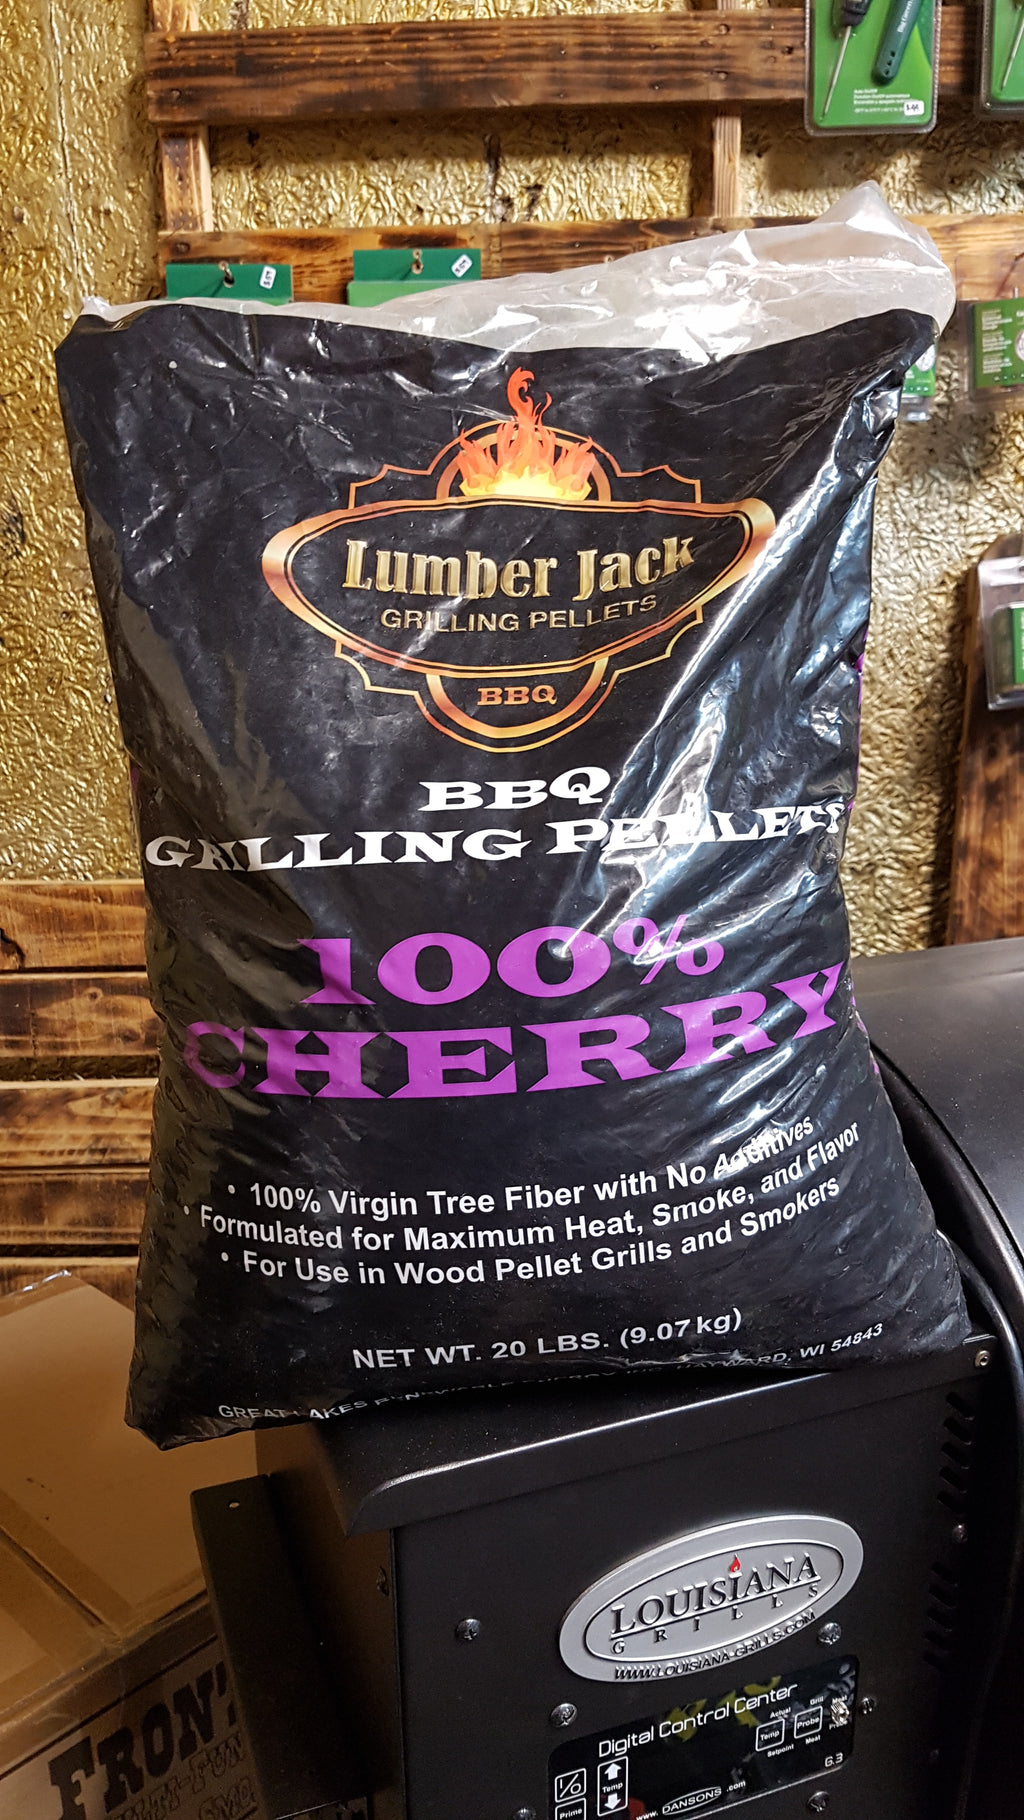 100% Cherry BBQ Grilling Pellets by Lumber Jack